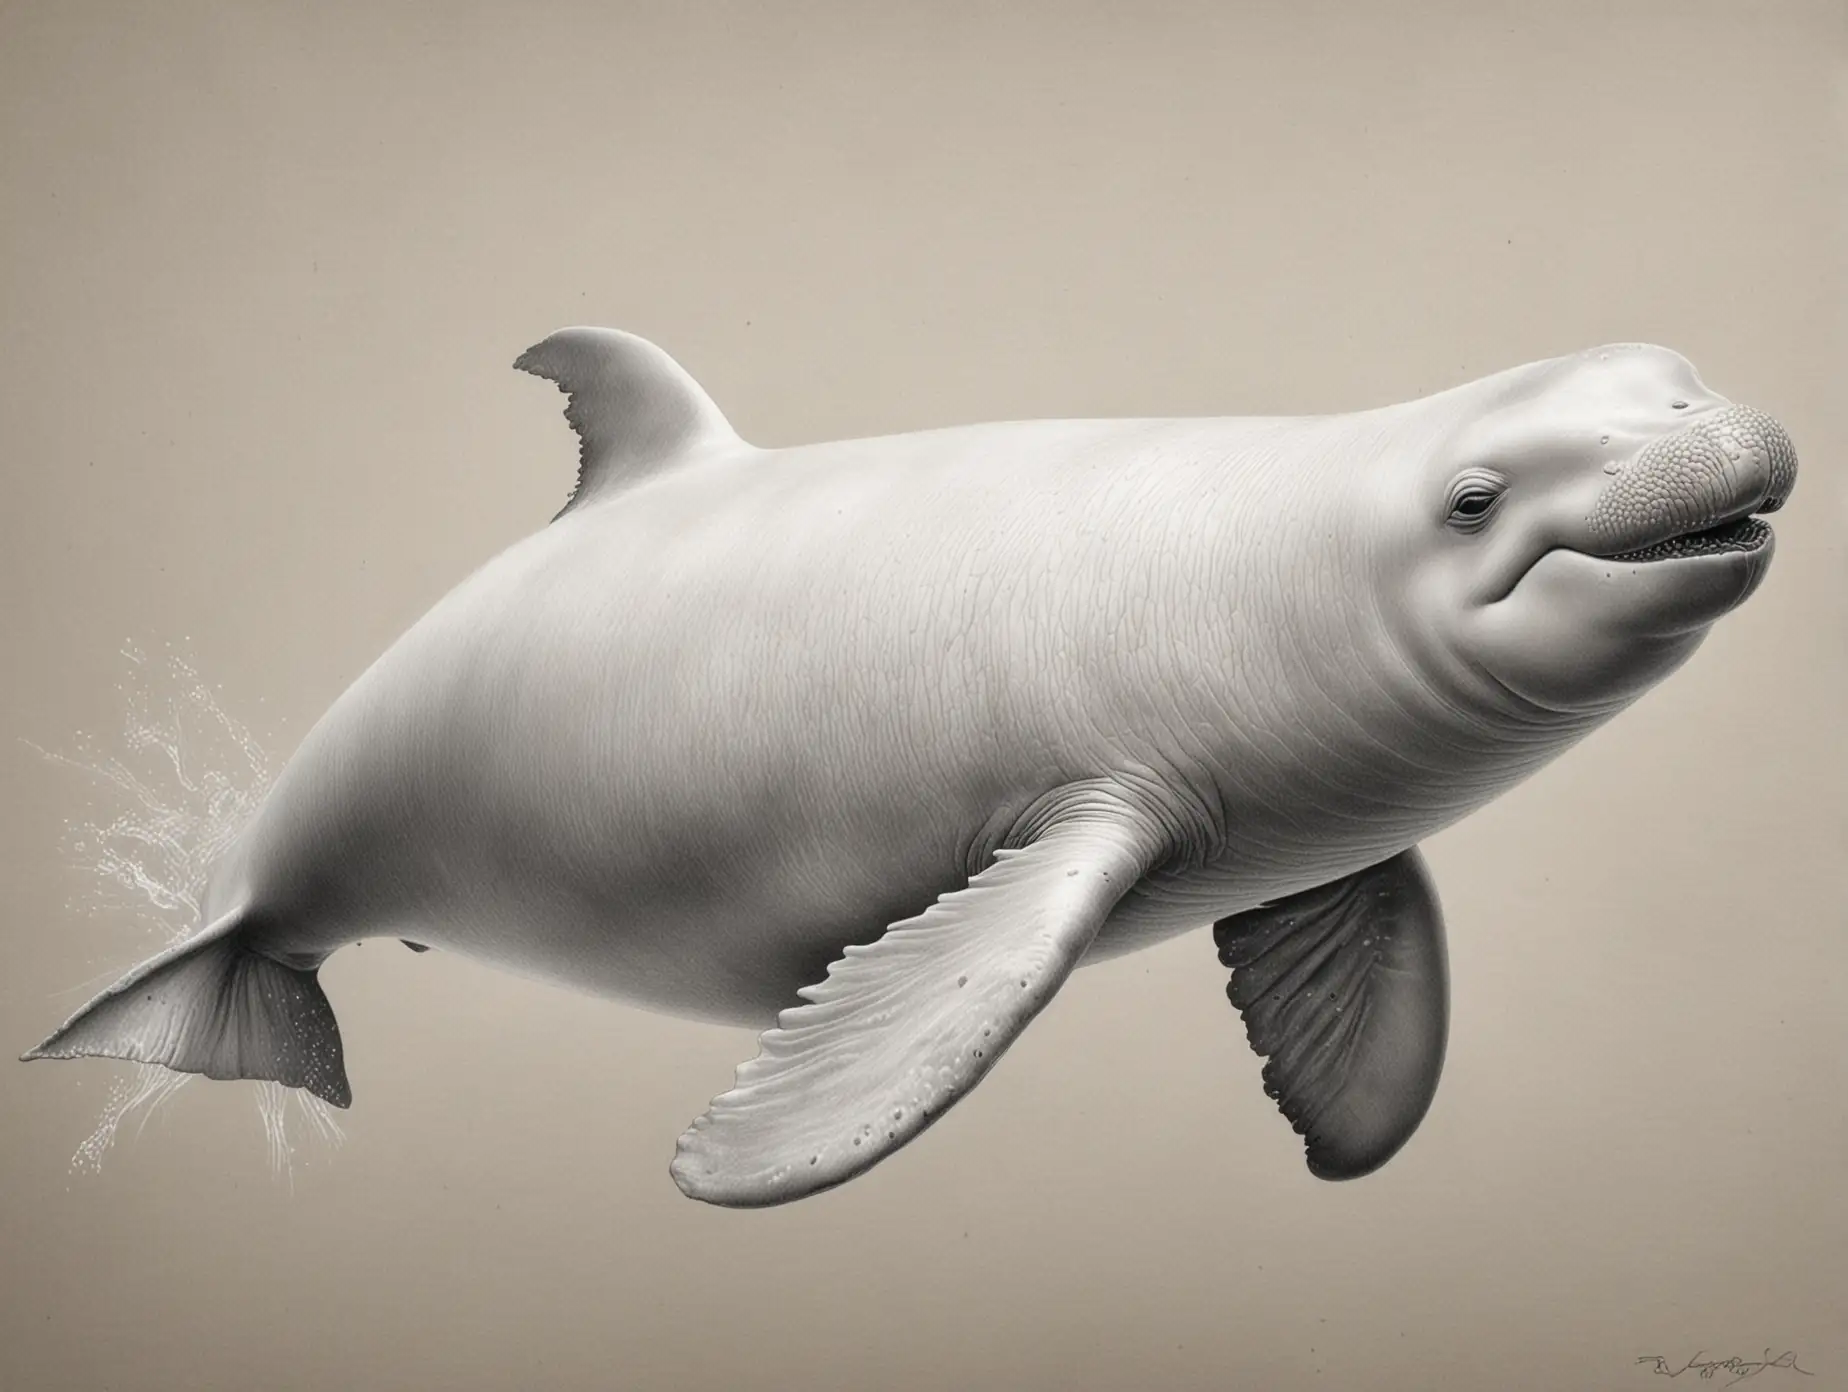 Detailed-Beluga-Drawing-in-Realistic-Graphite-Pencil-Style